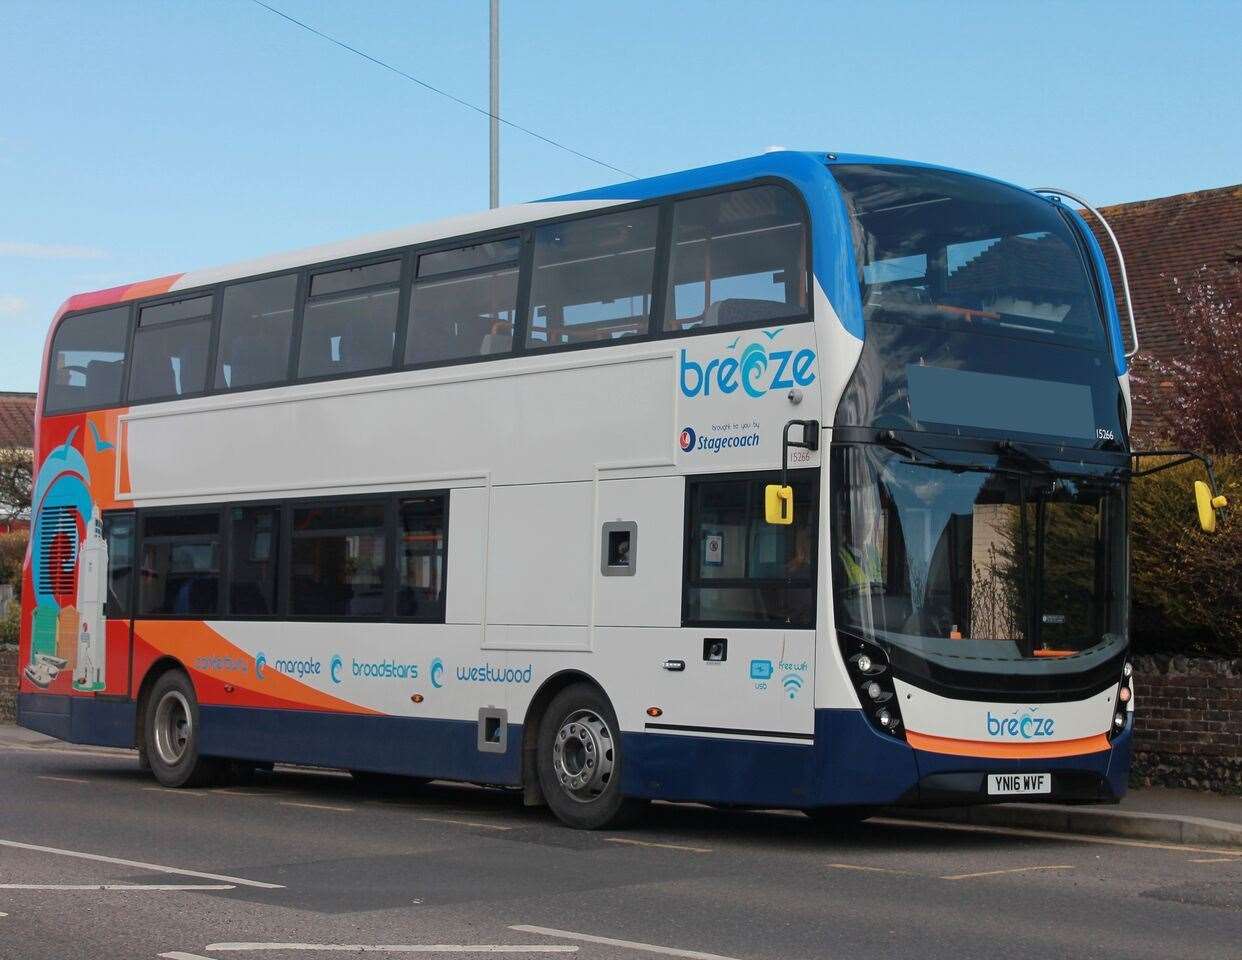 The coach operator runs services throughout Kent